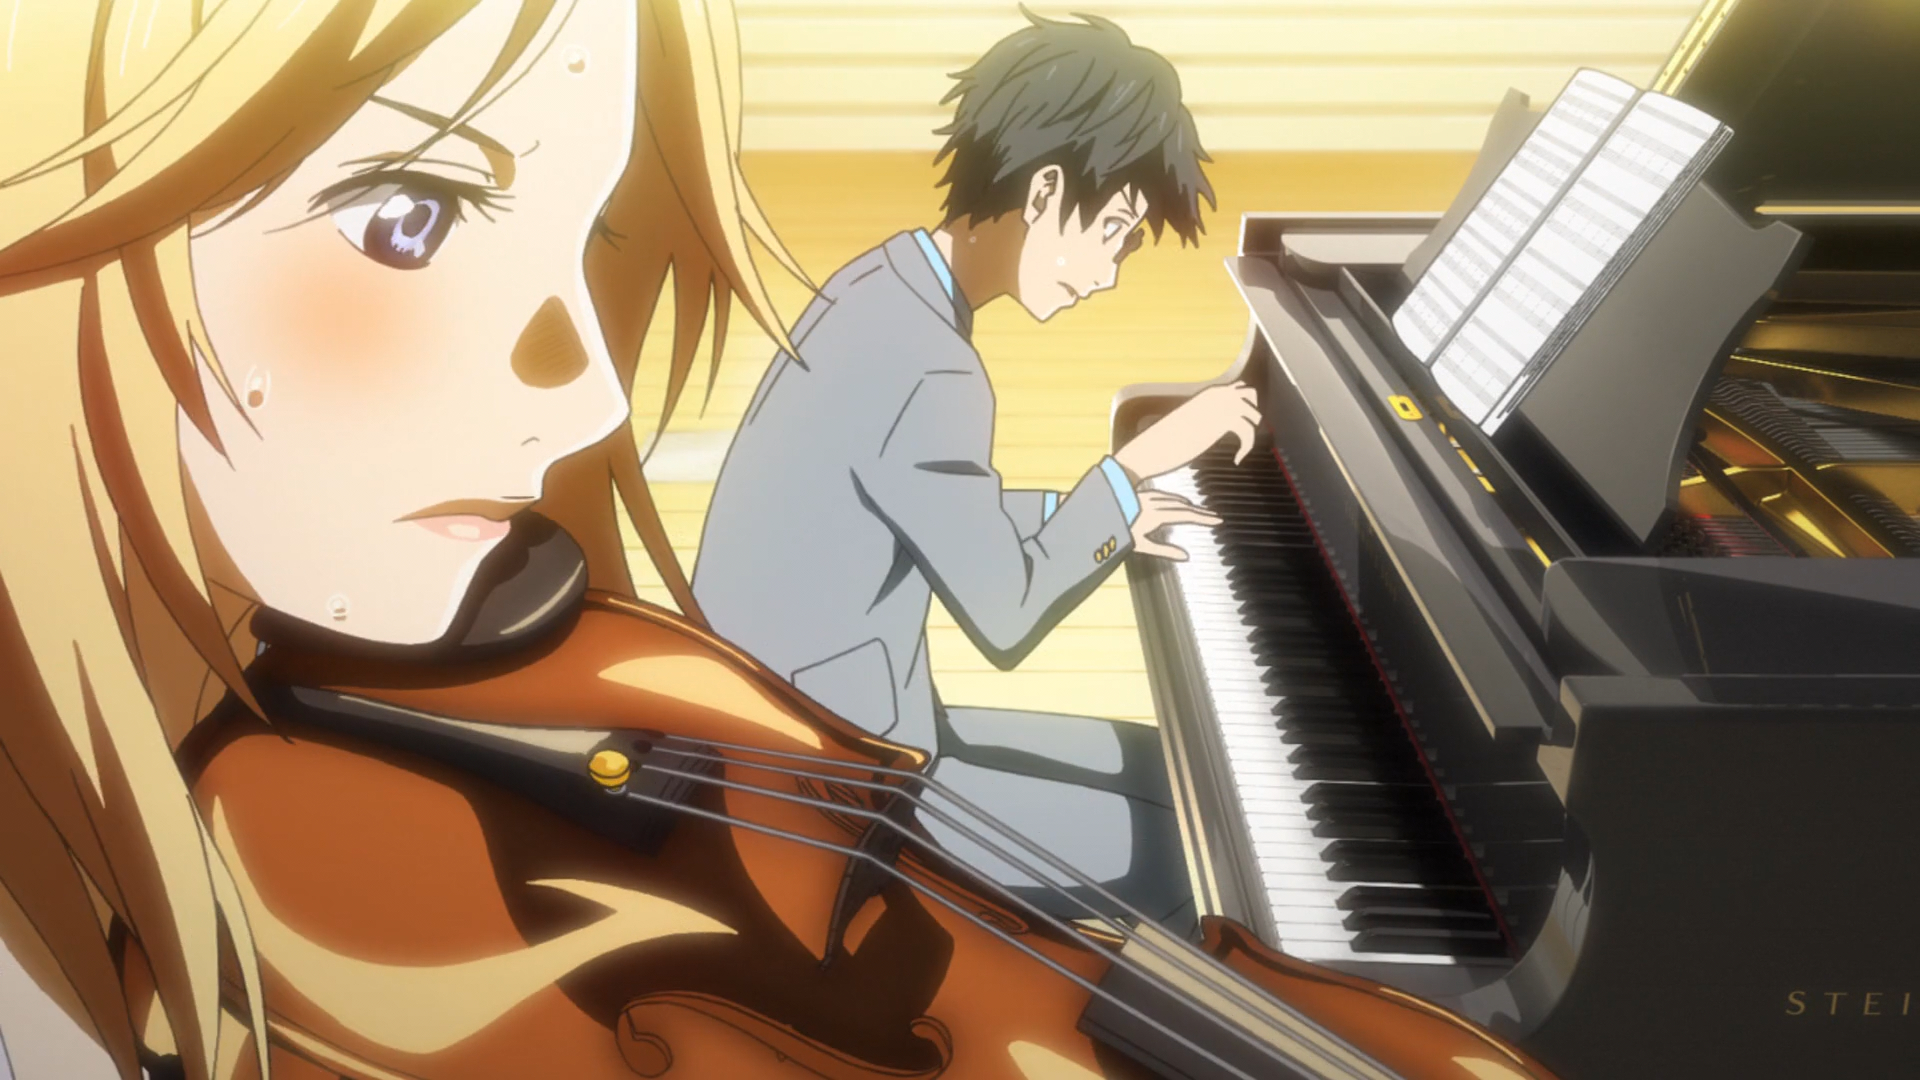 Different types of music in Your lie in april